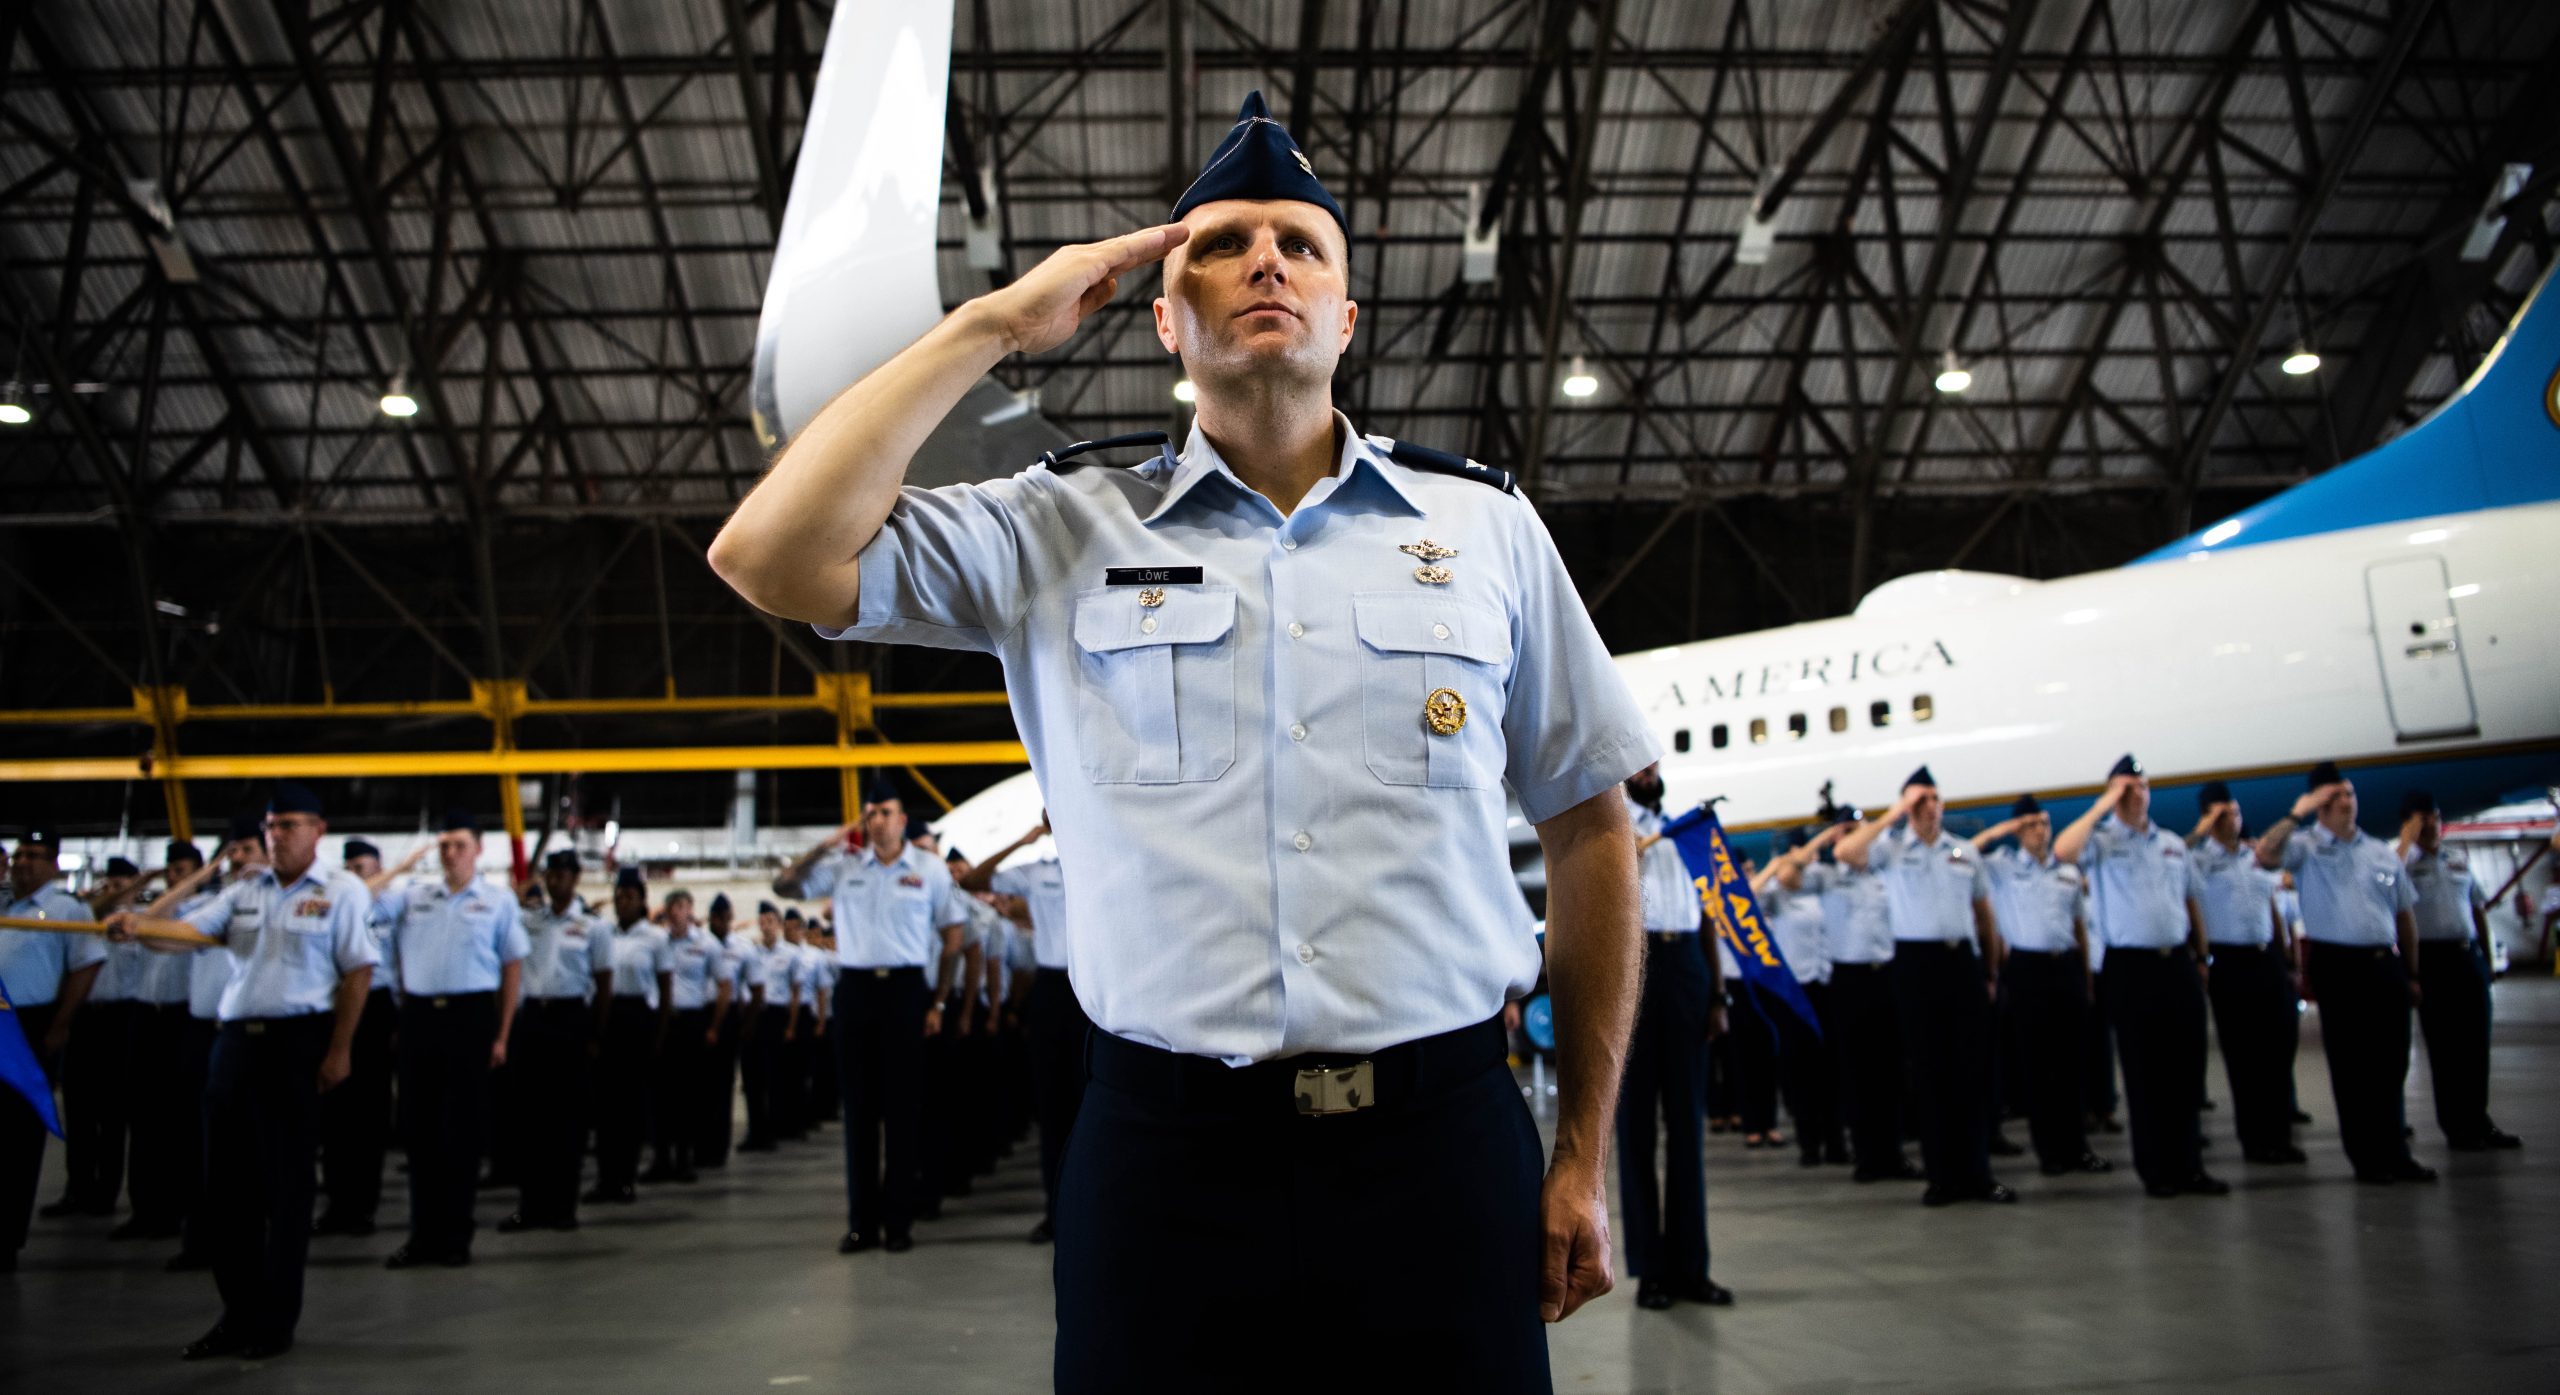 Air Force 3-star tapped as next Northern Command boss